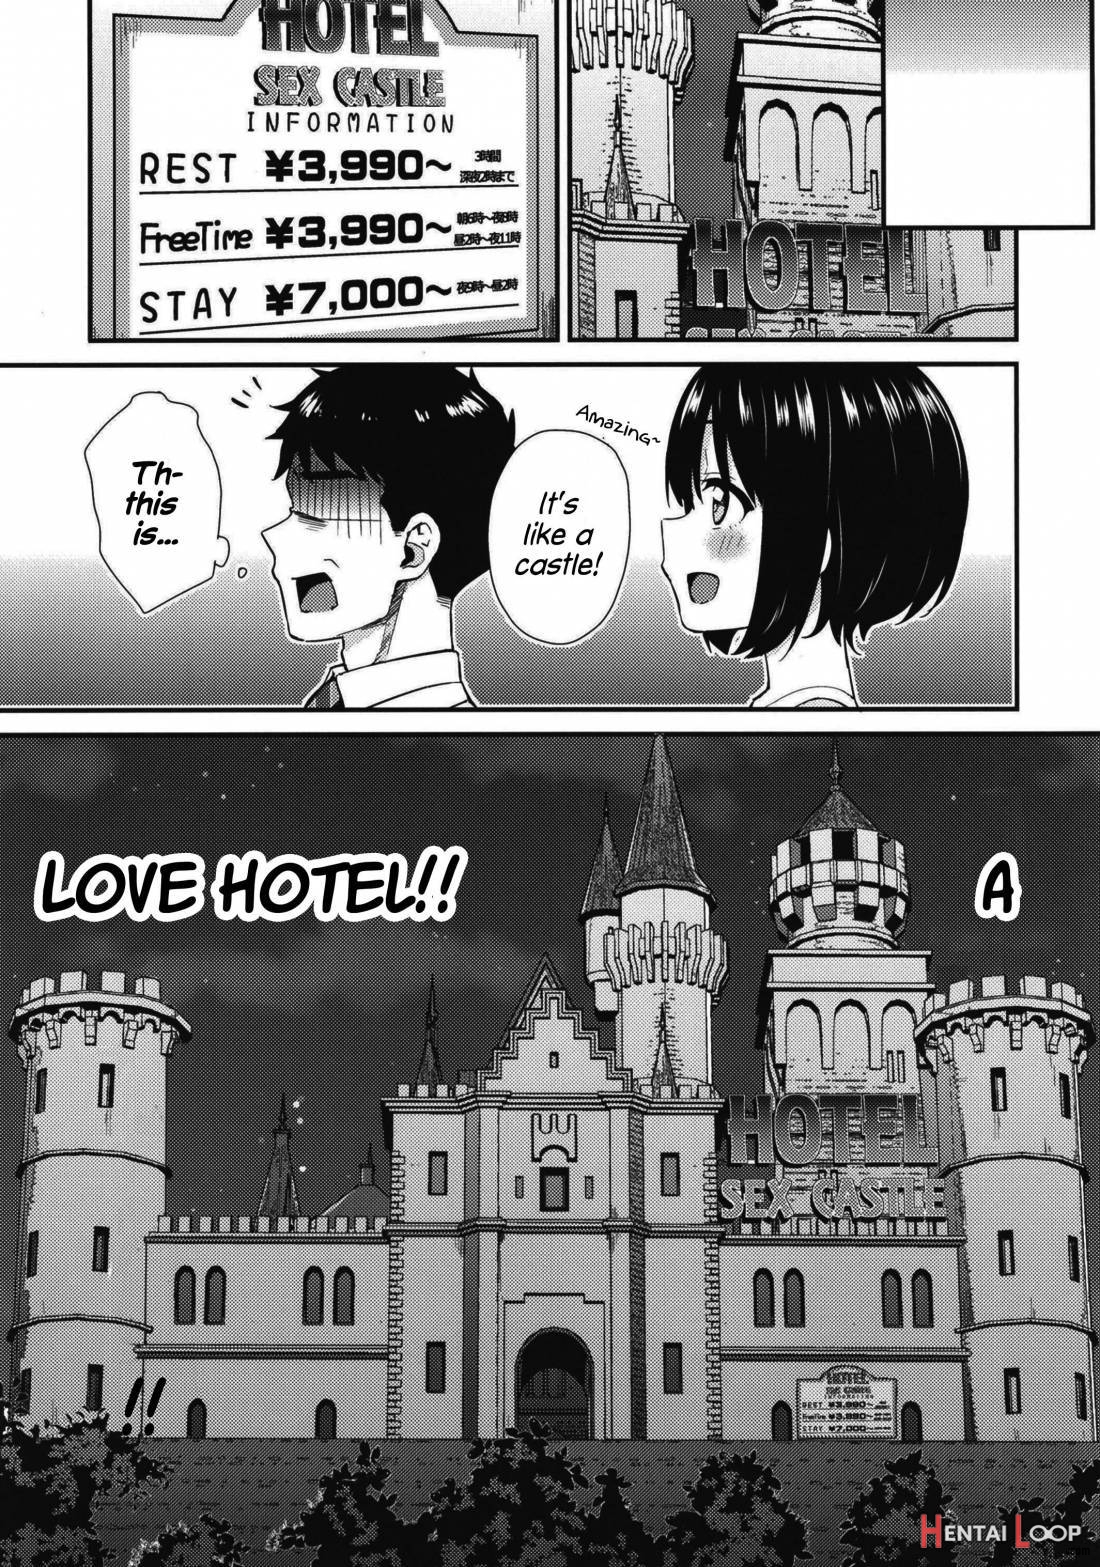 Overnight Hotel Stay With Kako-san. page 4